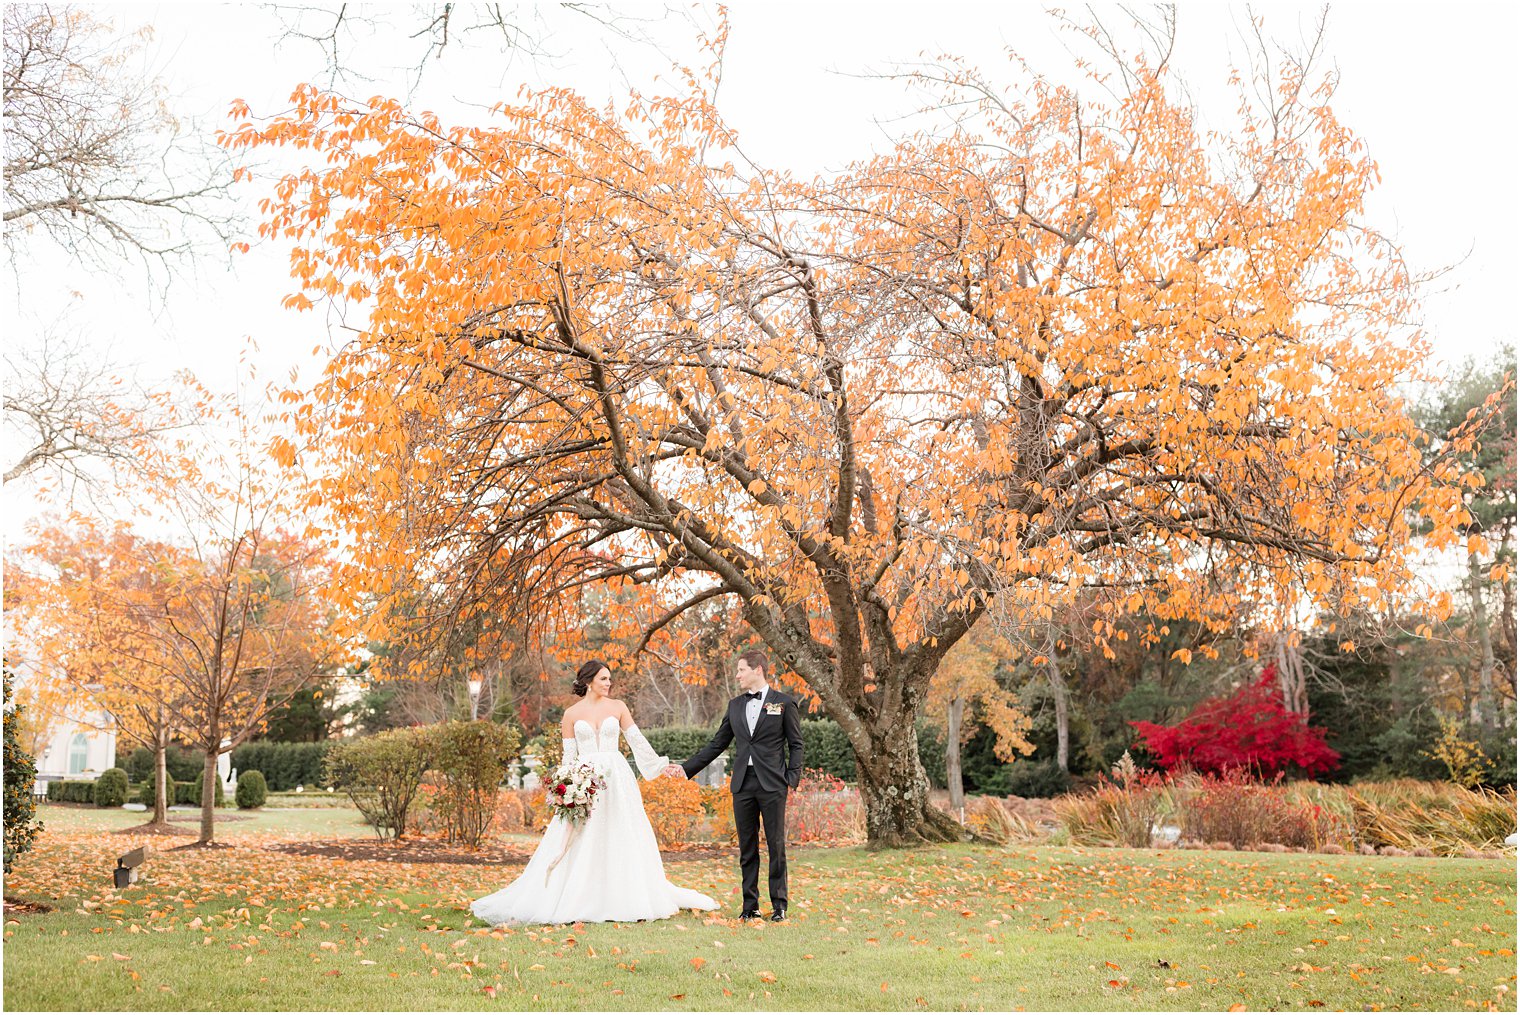 newlyweds hold hands under tree with orange leaves during winter wedding portraits at Park Chateau Estate